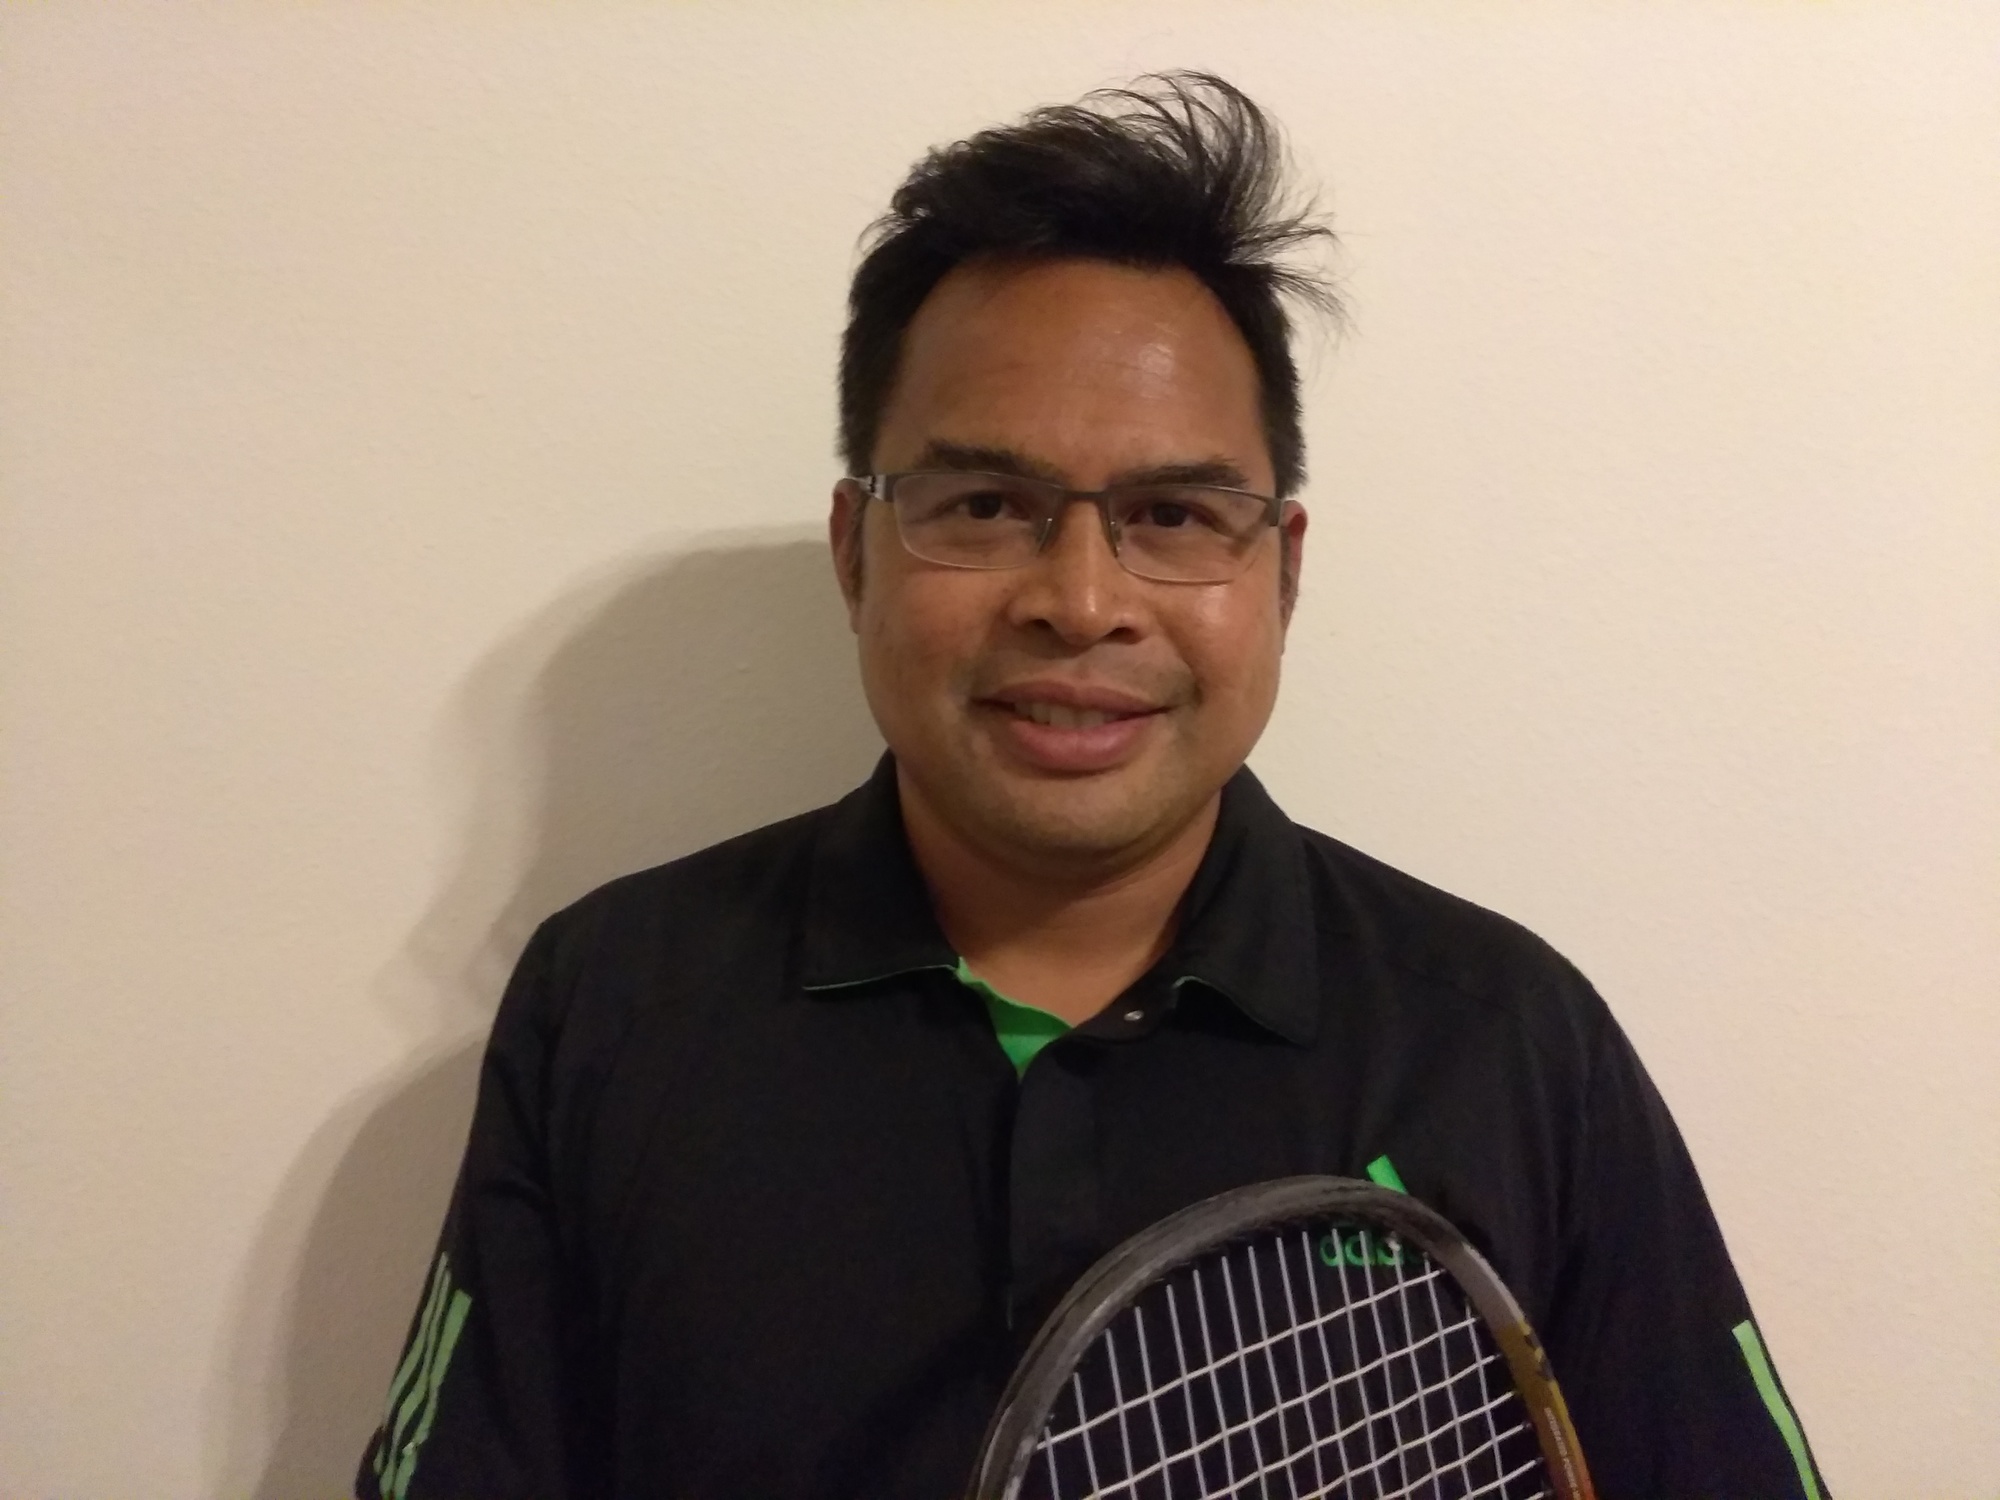 Aaron P. teaches tennis lessons in Pearland, TX